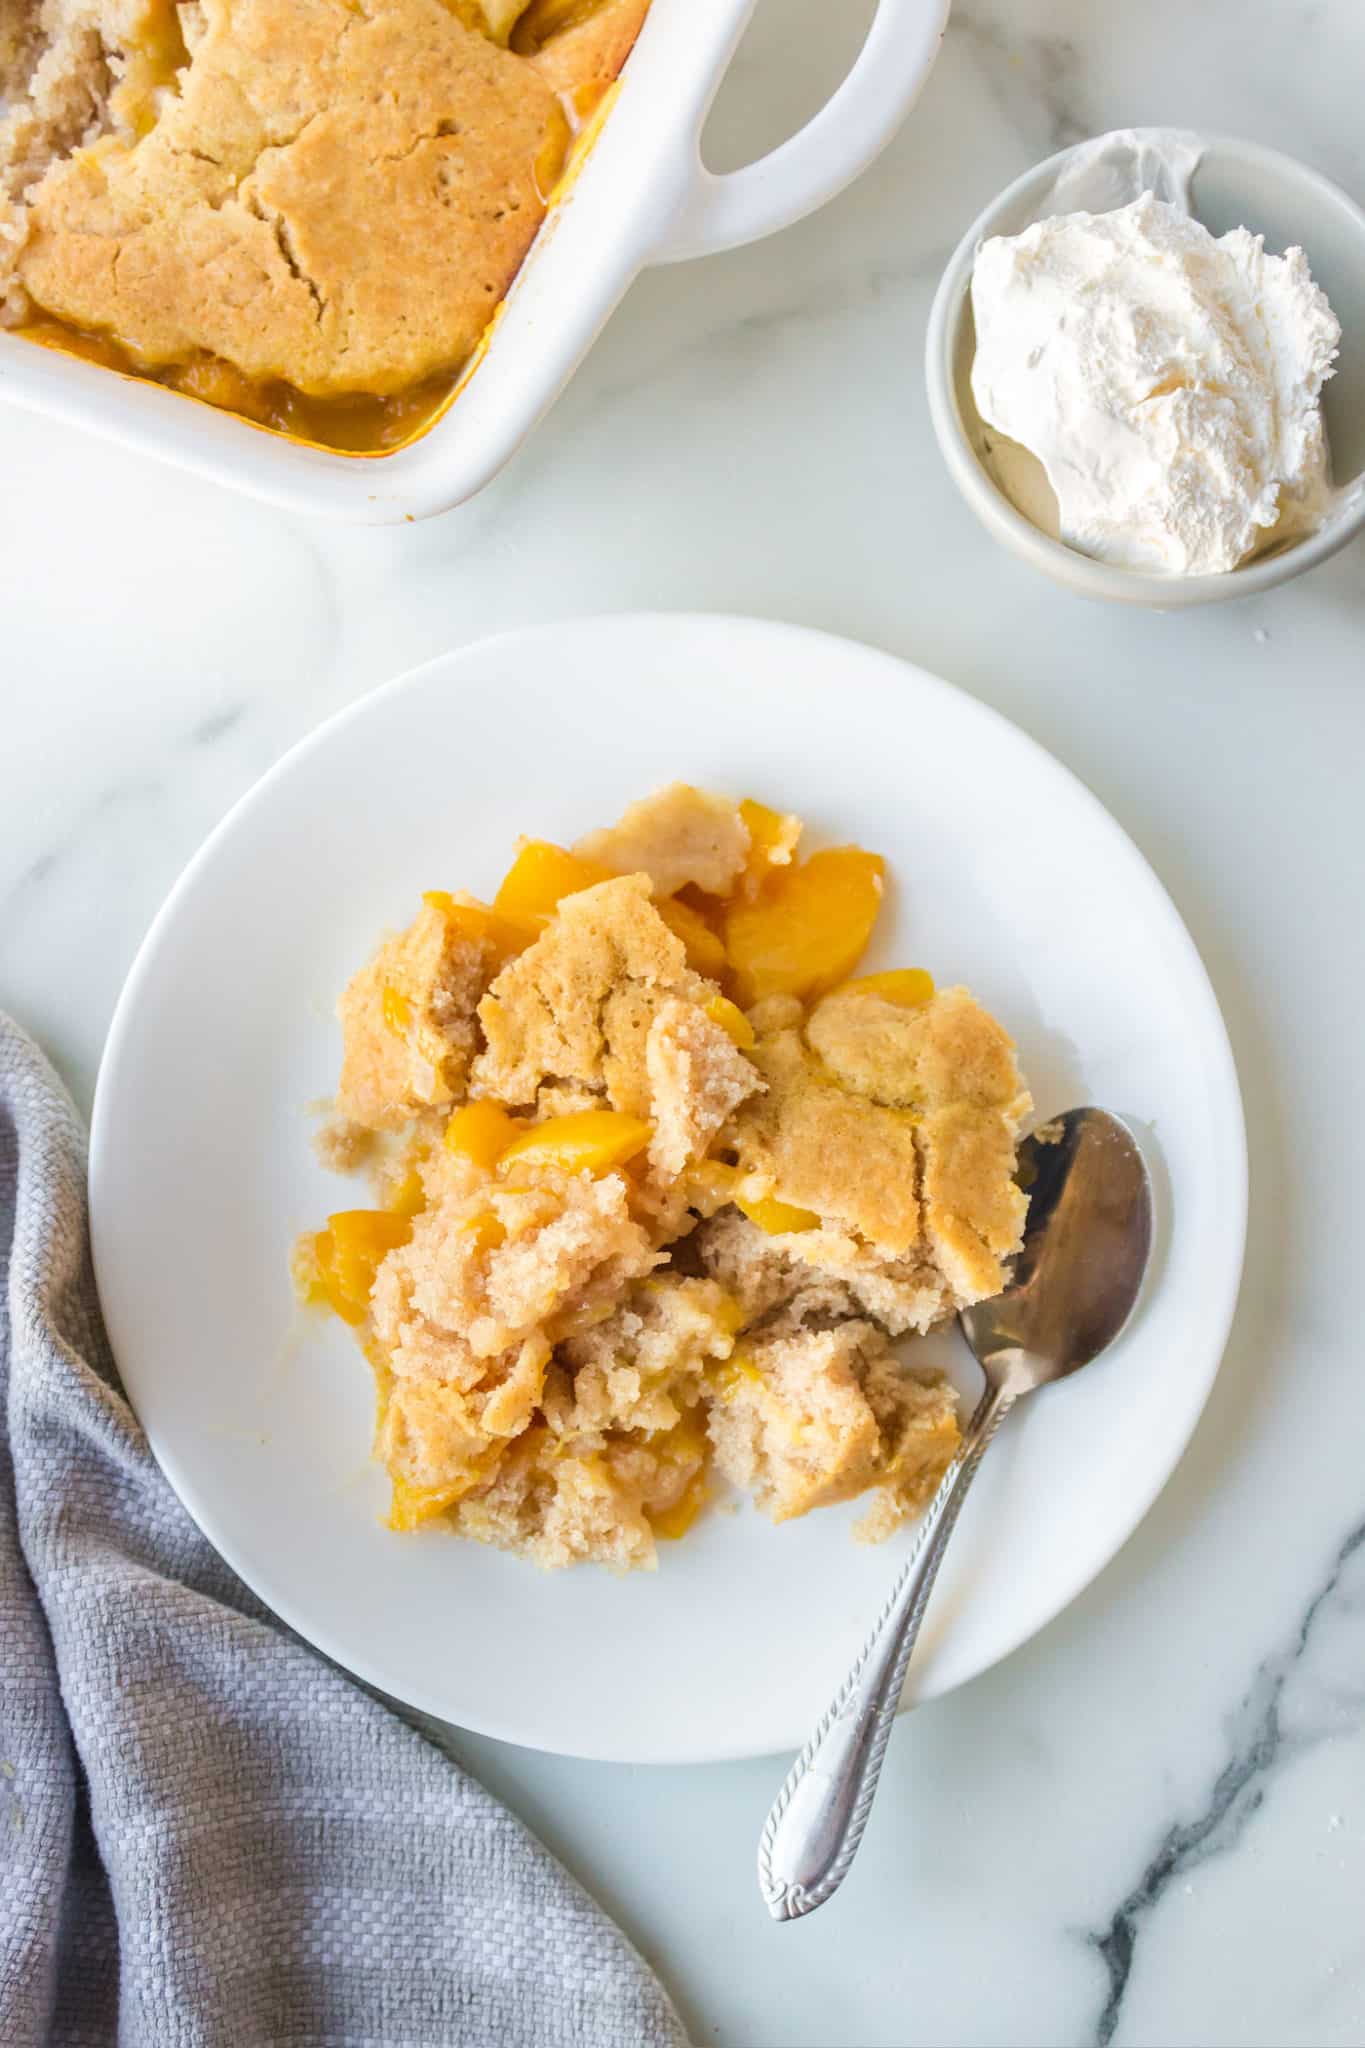 A plate of peach cobbler with a spoon and a napkin.